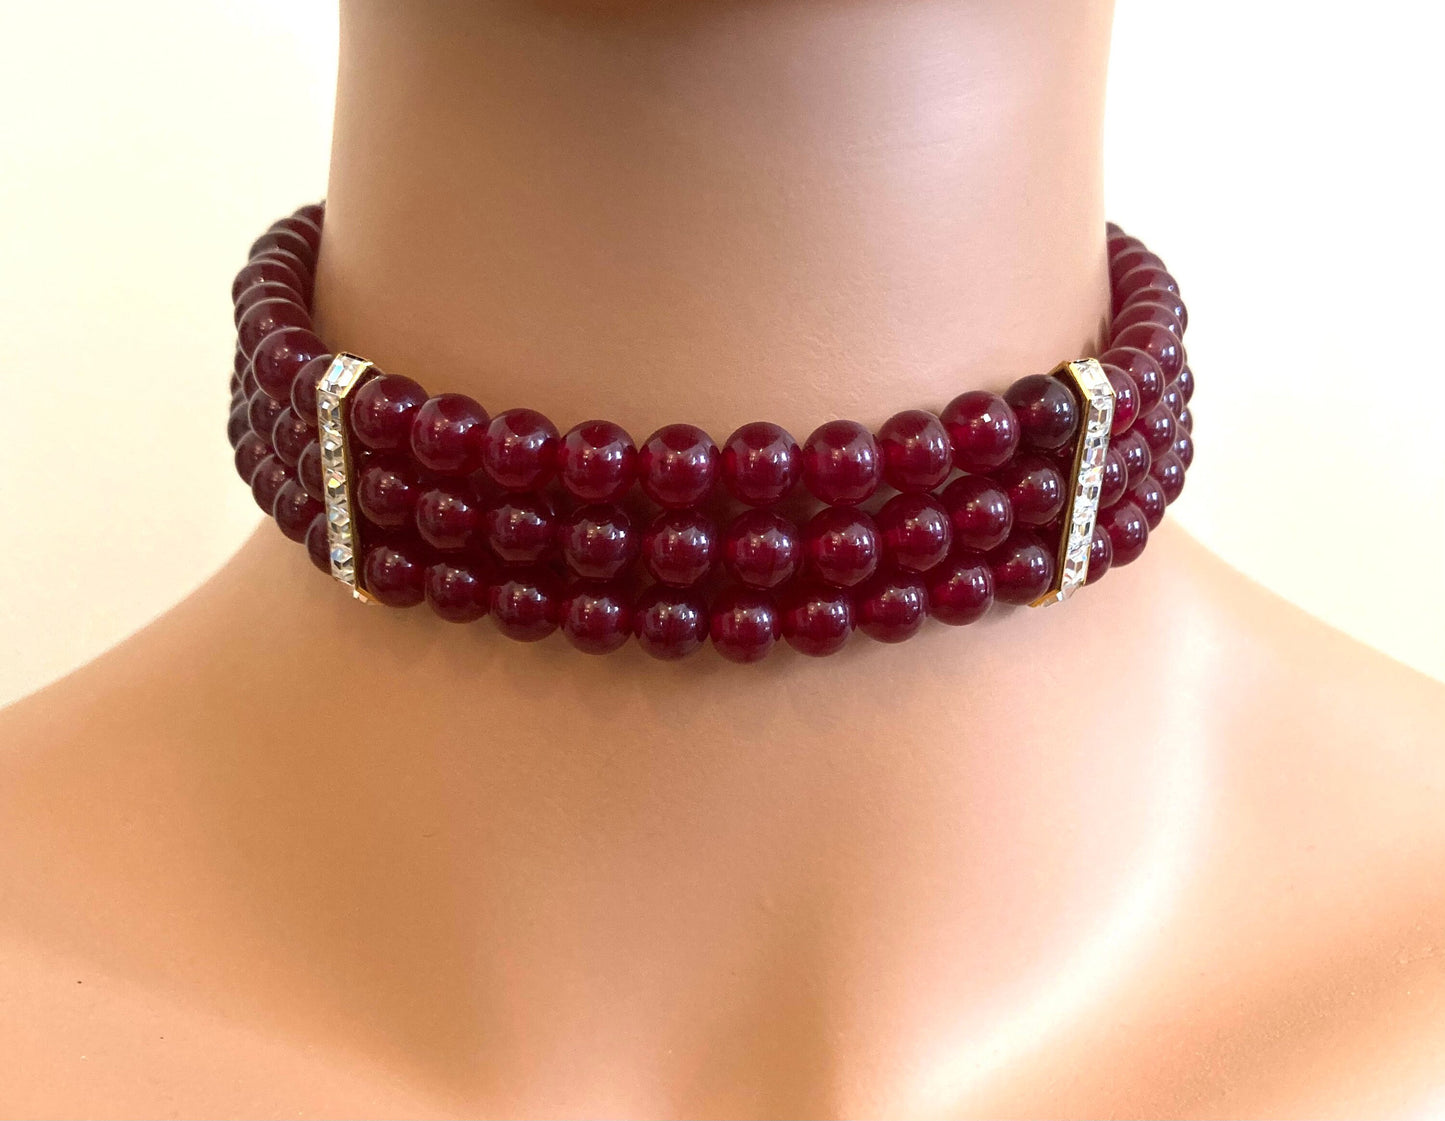 Red Choker Necklace with Gold Rhinestone bar accents adjustable made of cranberry red glass beads from Japan Cherry Brand vintage